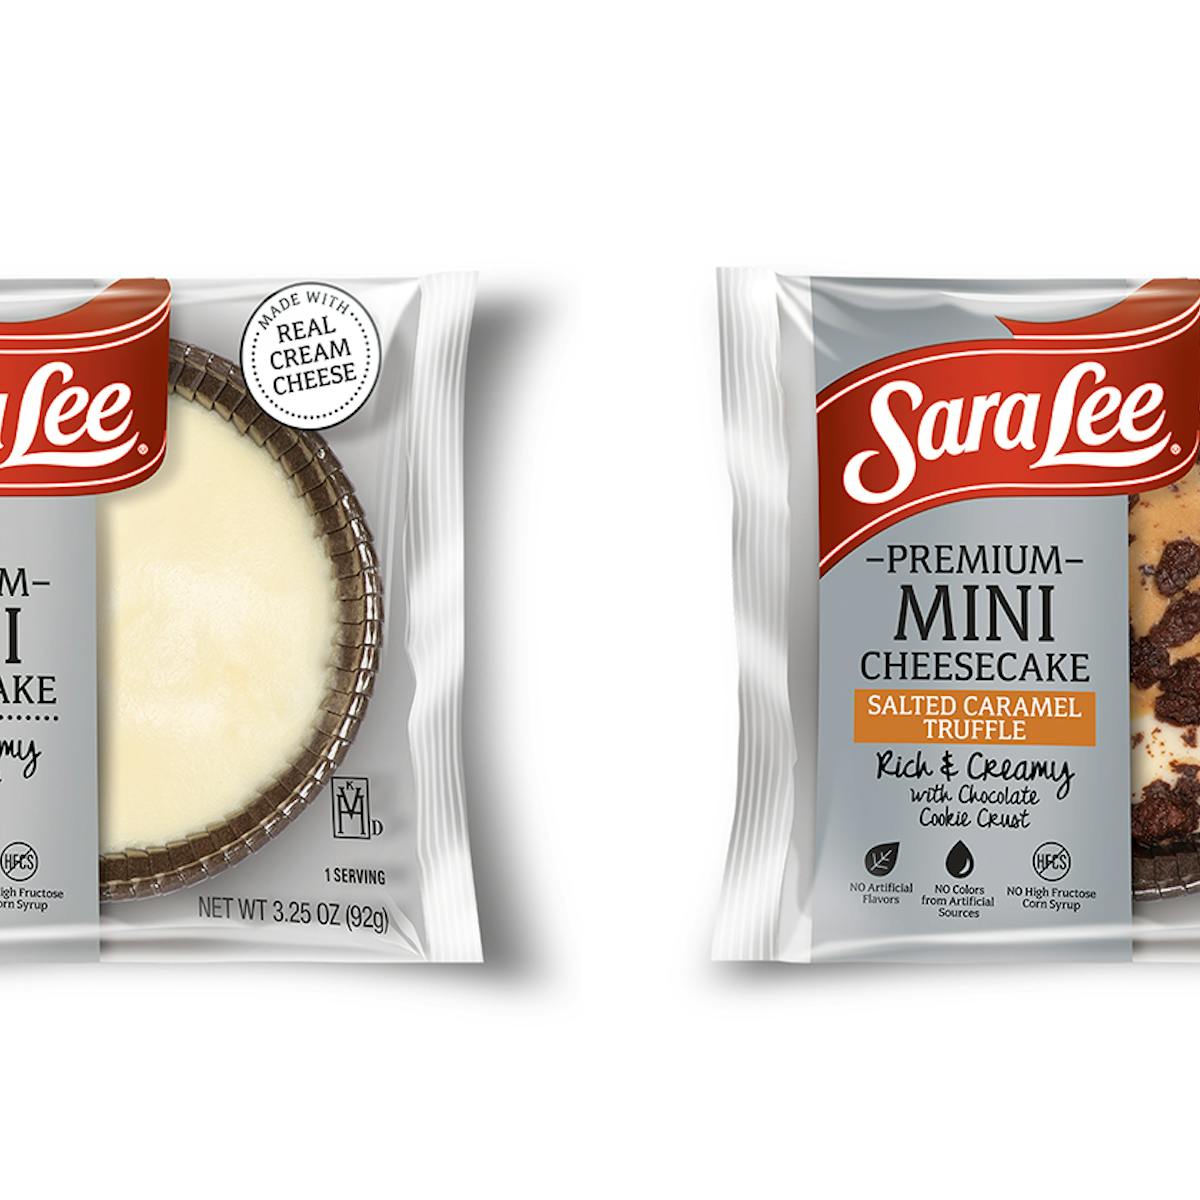 Sara Lee Mini Cheesecakes are now available to micro market operators in plain and salted caramel varieties; a strawberry flavor is coming soon. For more information, call (513) 310-9004.